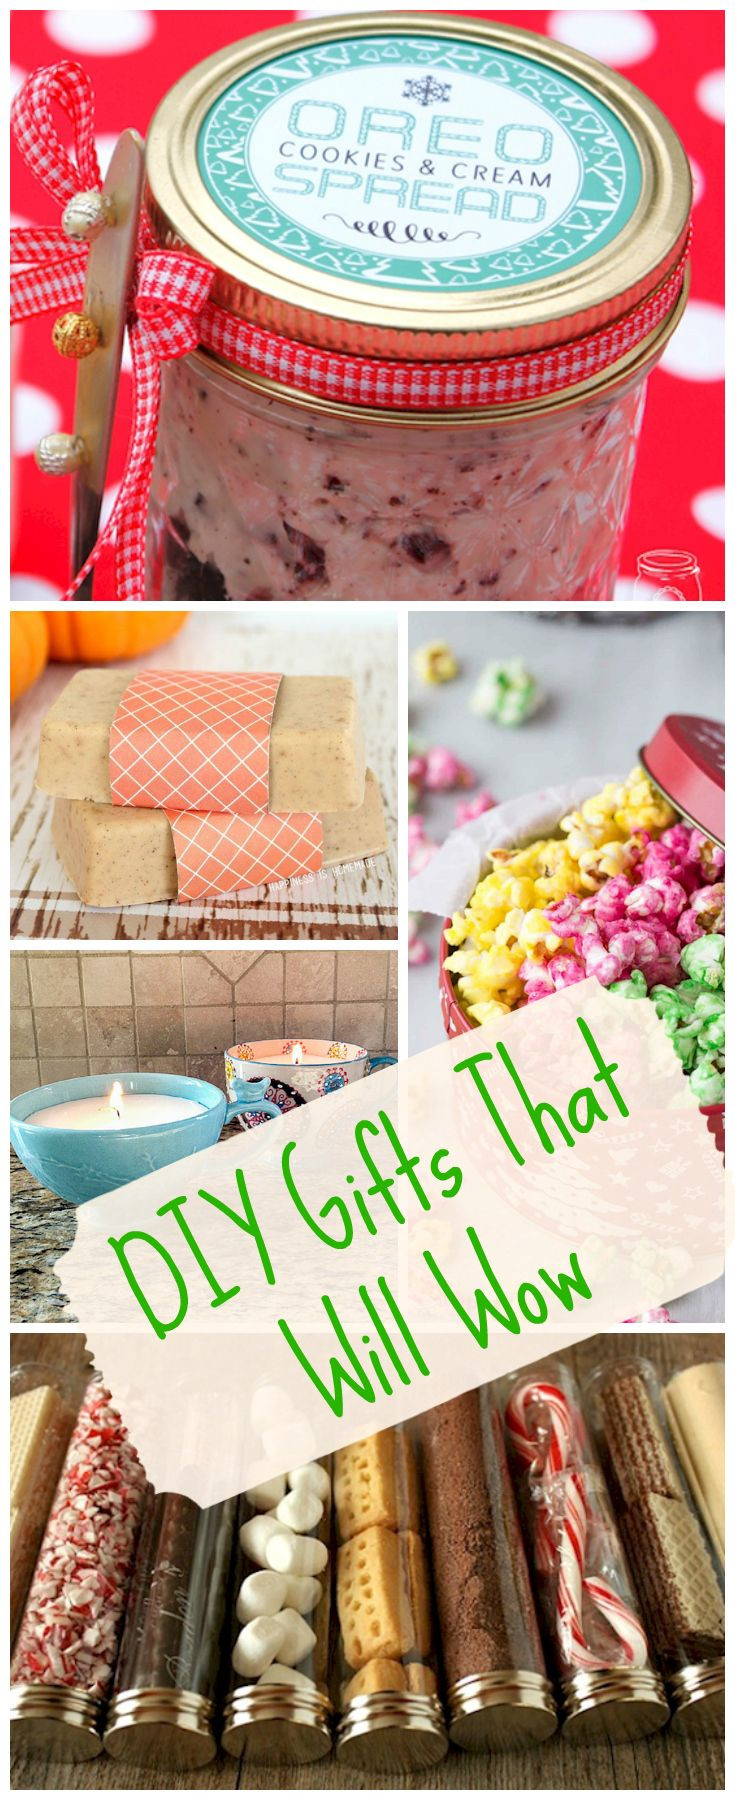 Best Gift Ideas For Coworkers
 16 DIY Christmas Gifts With The WOW Factor